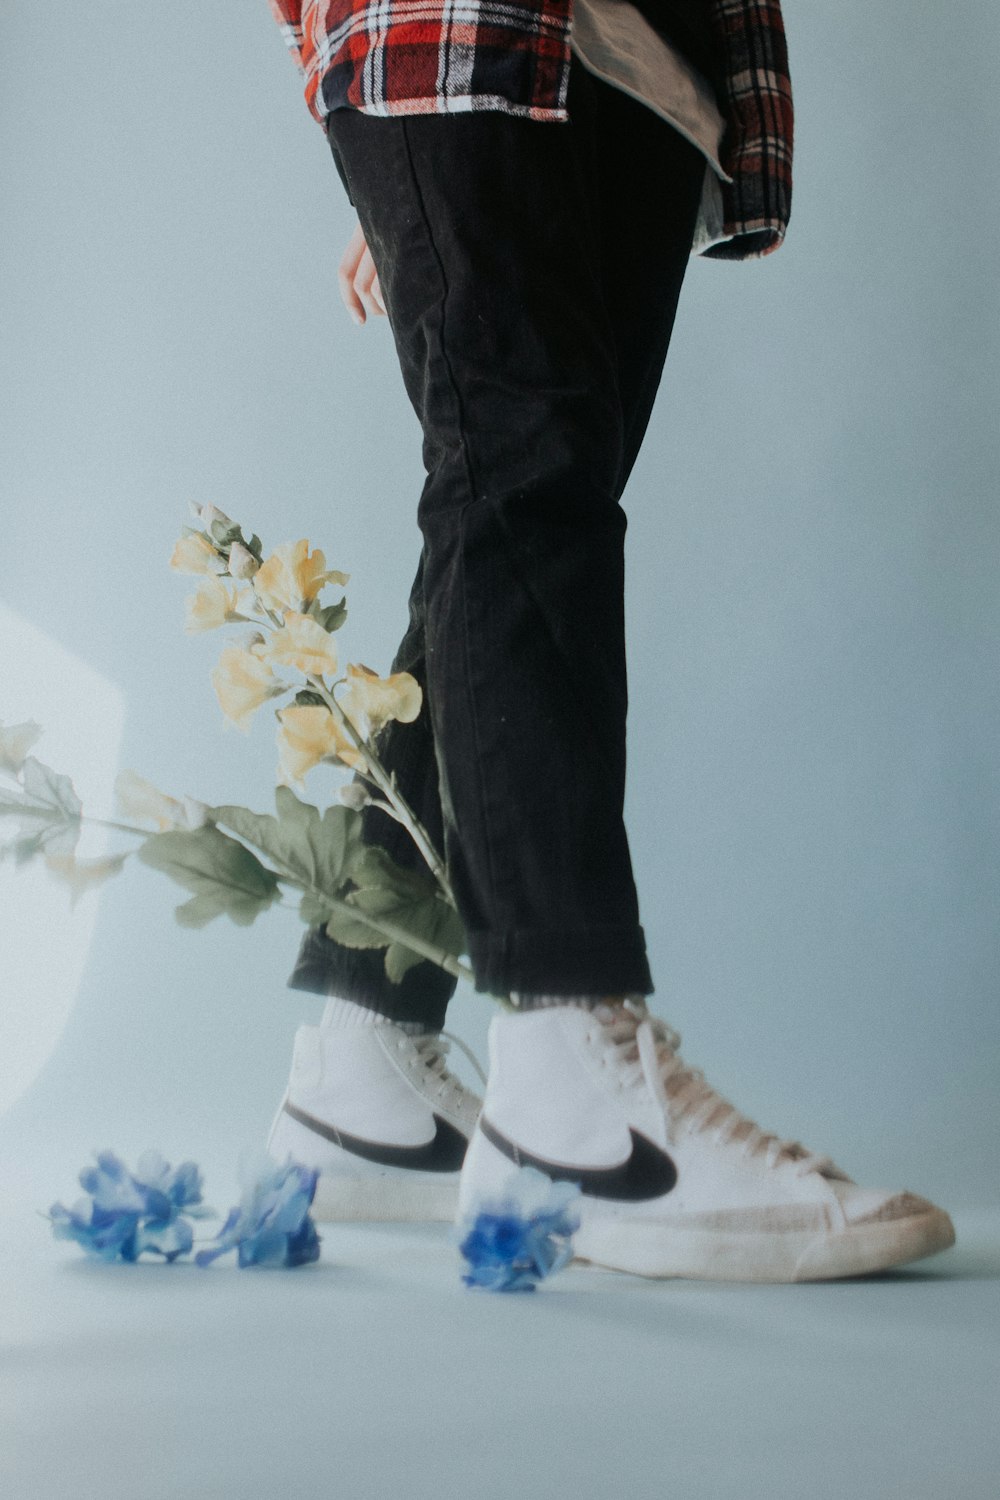 person in black pants and white sneakers standing beside yellow flowers